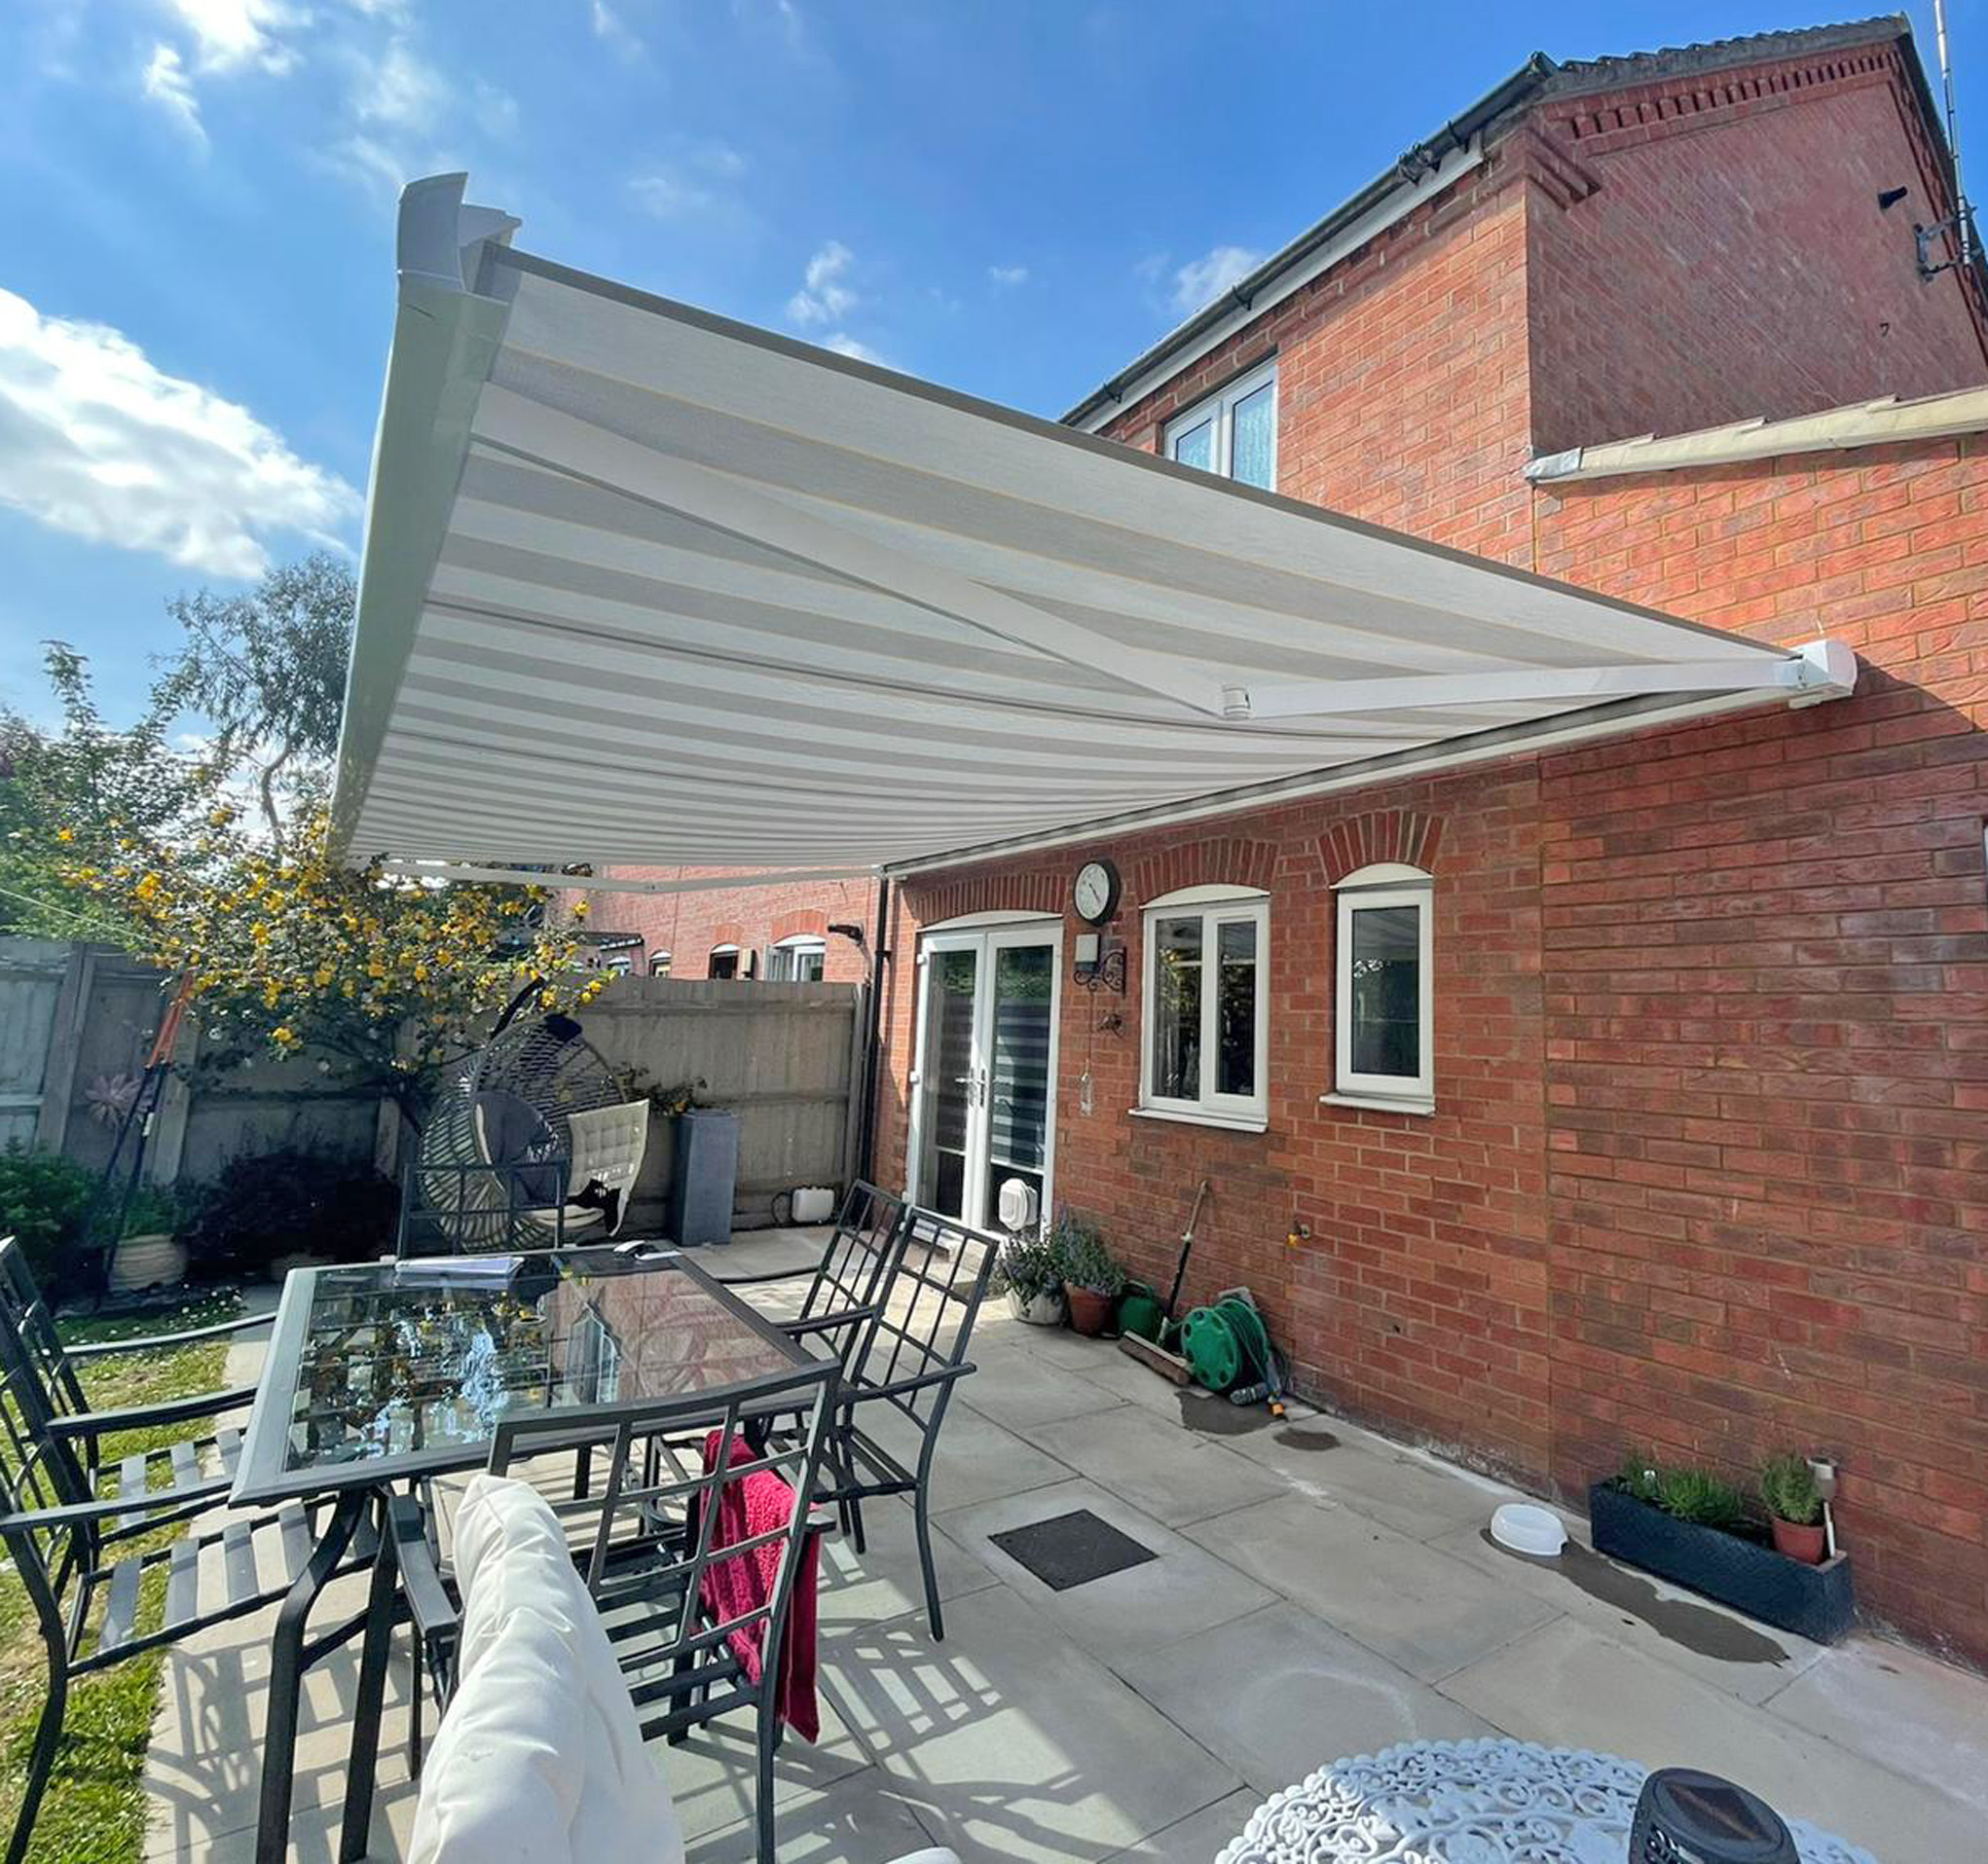 Birkdale 4m x 3m Green Fabric & White Frame With Remote Control Kiara Electric Awning